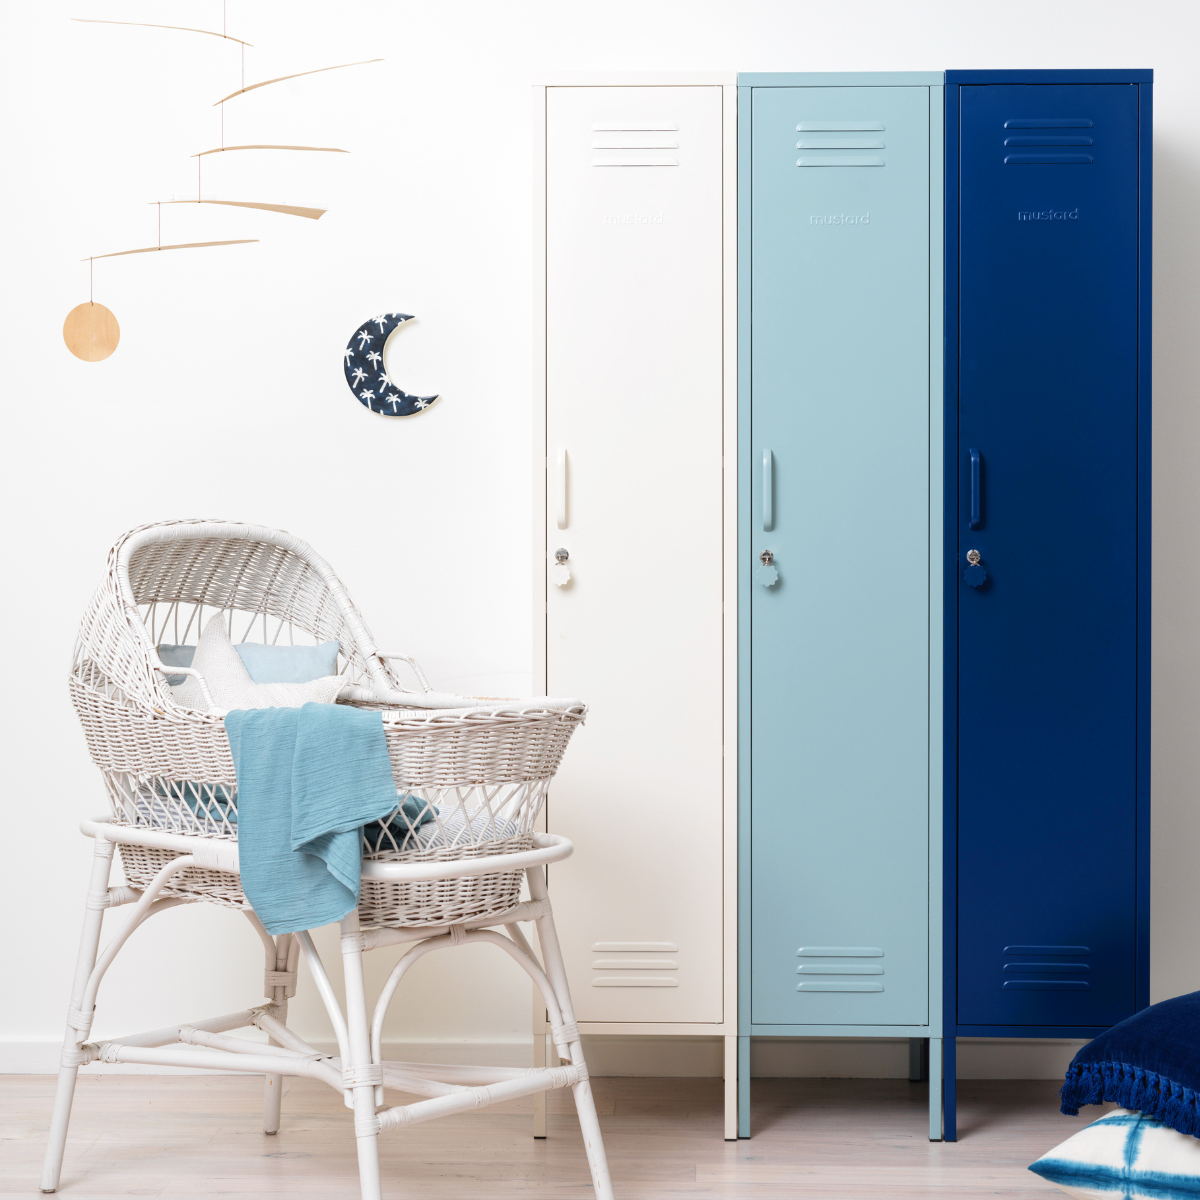 A trio of Skinny lockers in an ombre of White to Ocean to Navy sit behind a white wicker bassinet.